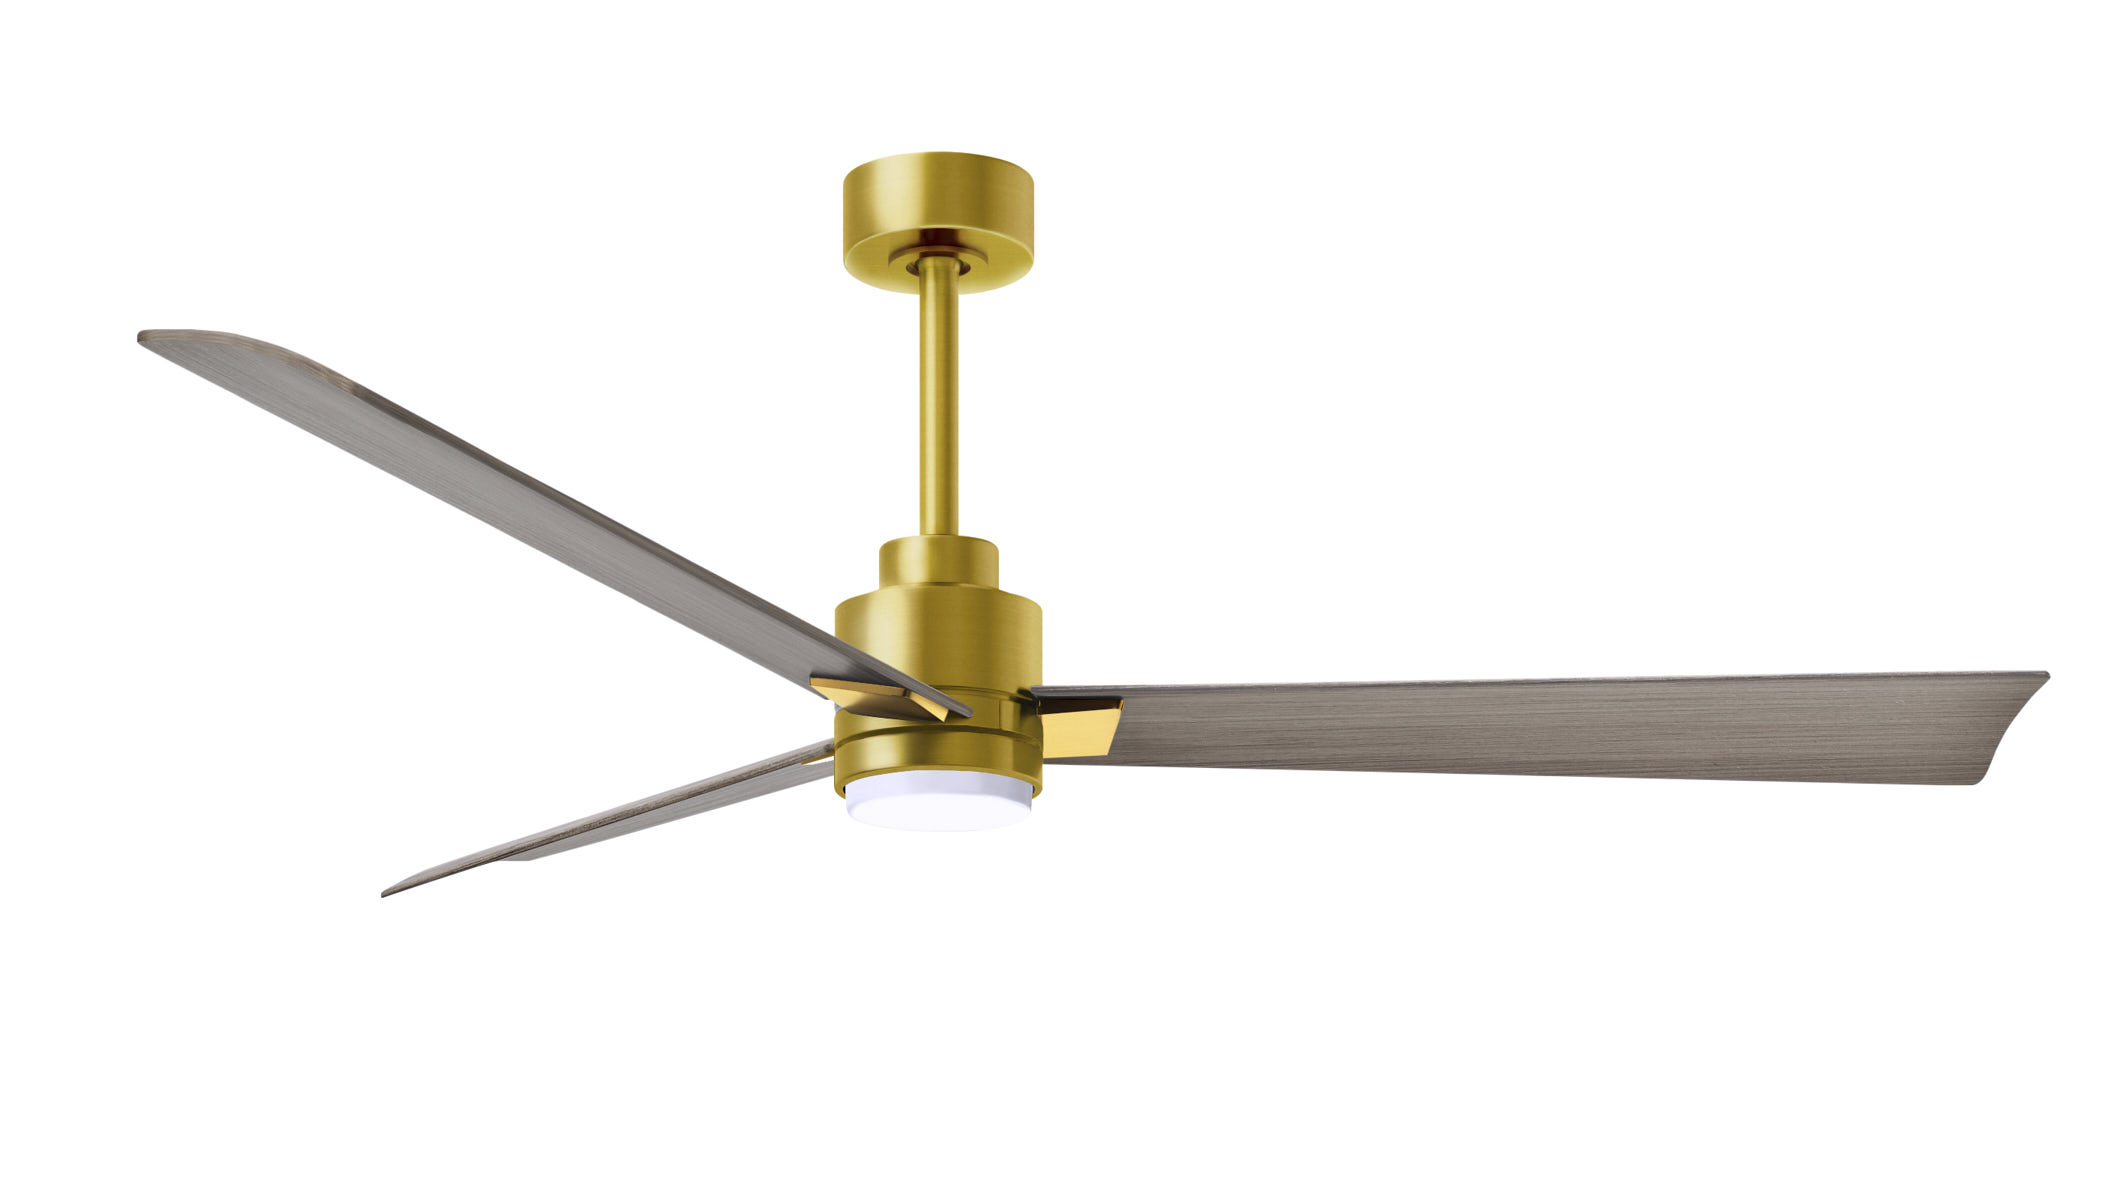 Alessandra-LK ceiling fan in brushed brass finish with 56" gray ash tone ABS blades by Matthews Fan Company.